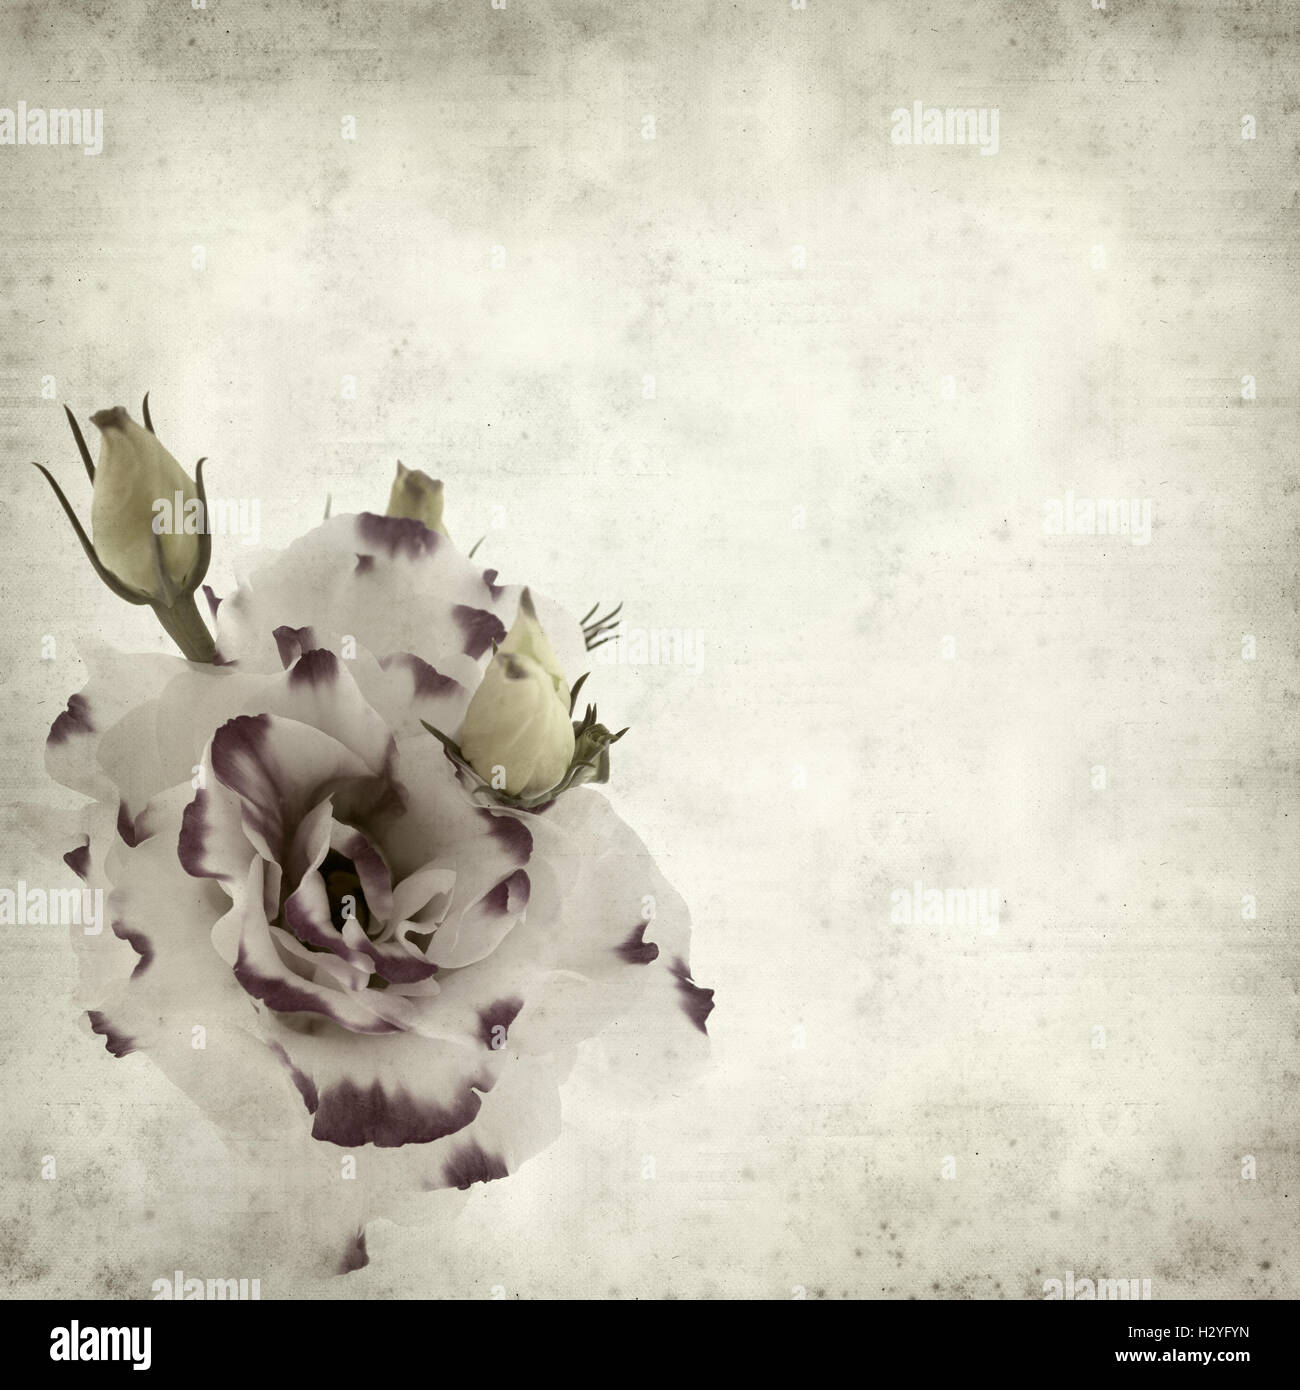 textured old paper background with white and blue Lisianthus flower Stock Photo